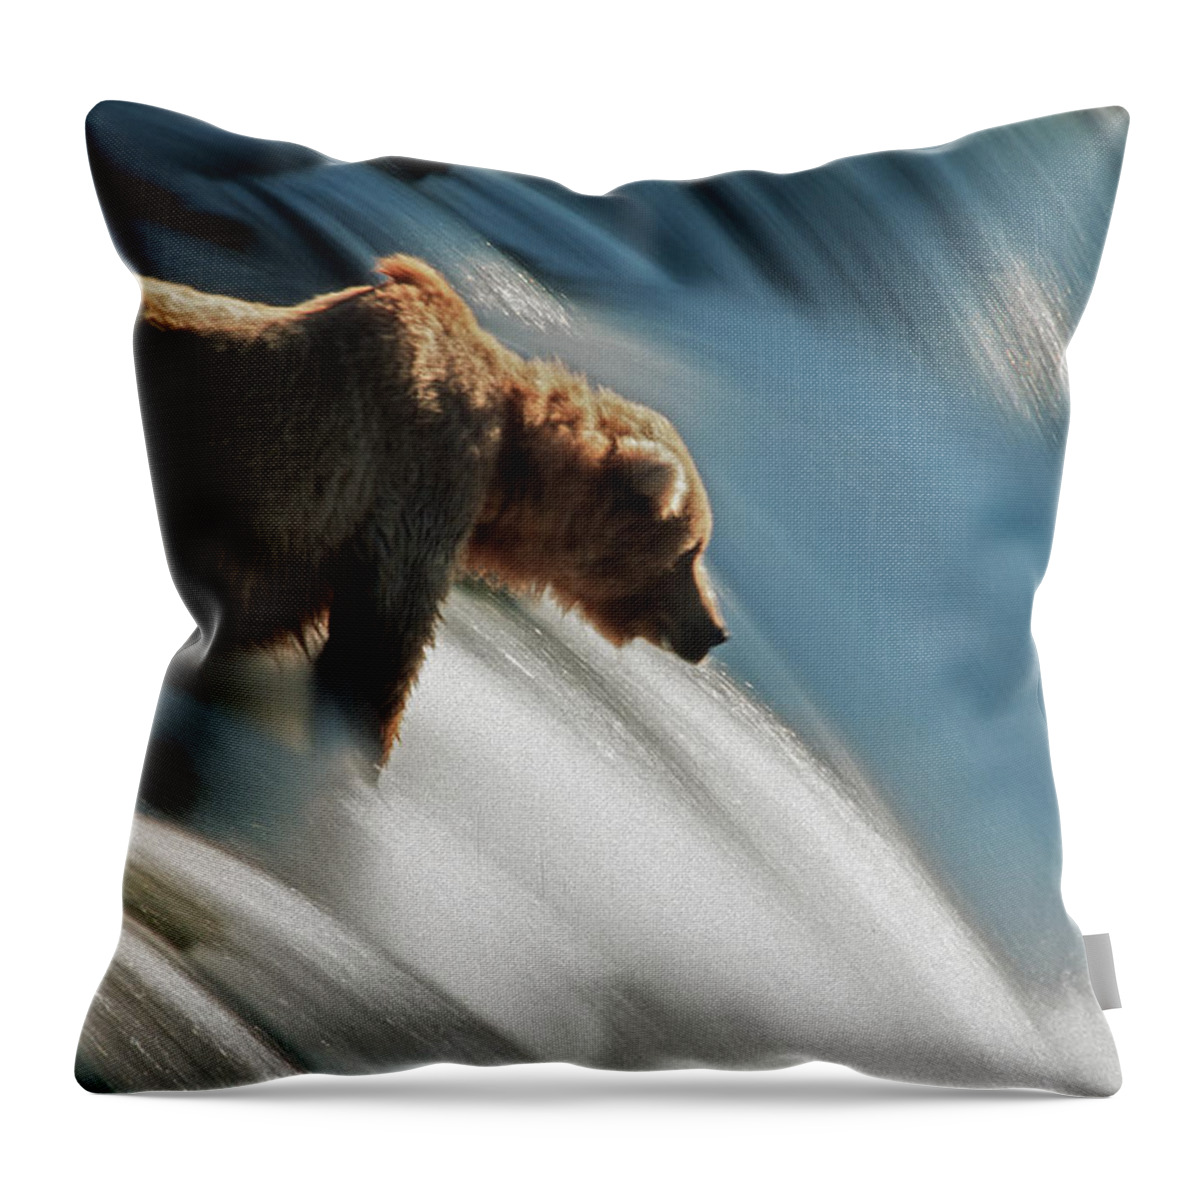 Poetry- Literature Throw Pillow featuring the photograph Brown Bear At Brooks Falls by Mark Newman